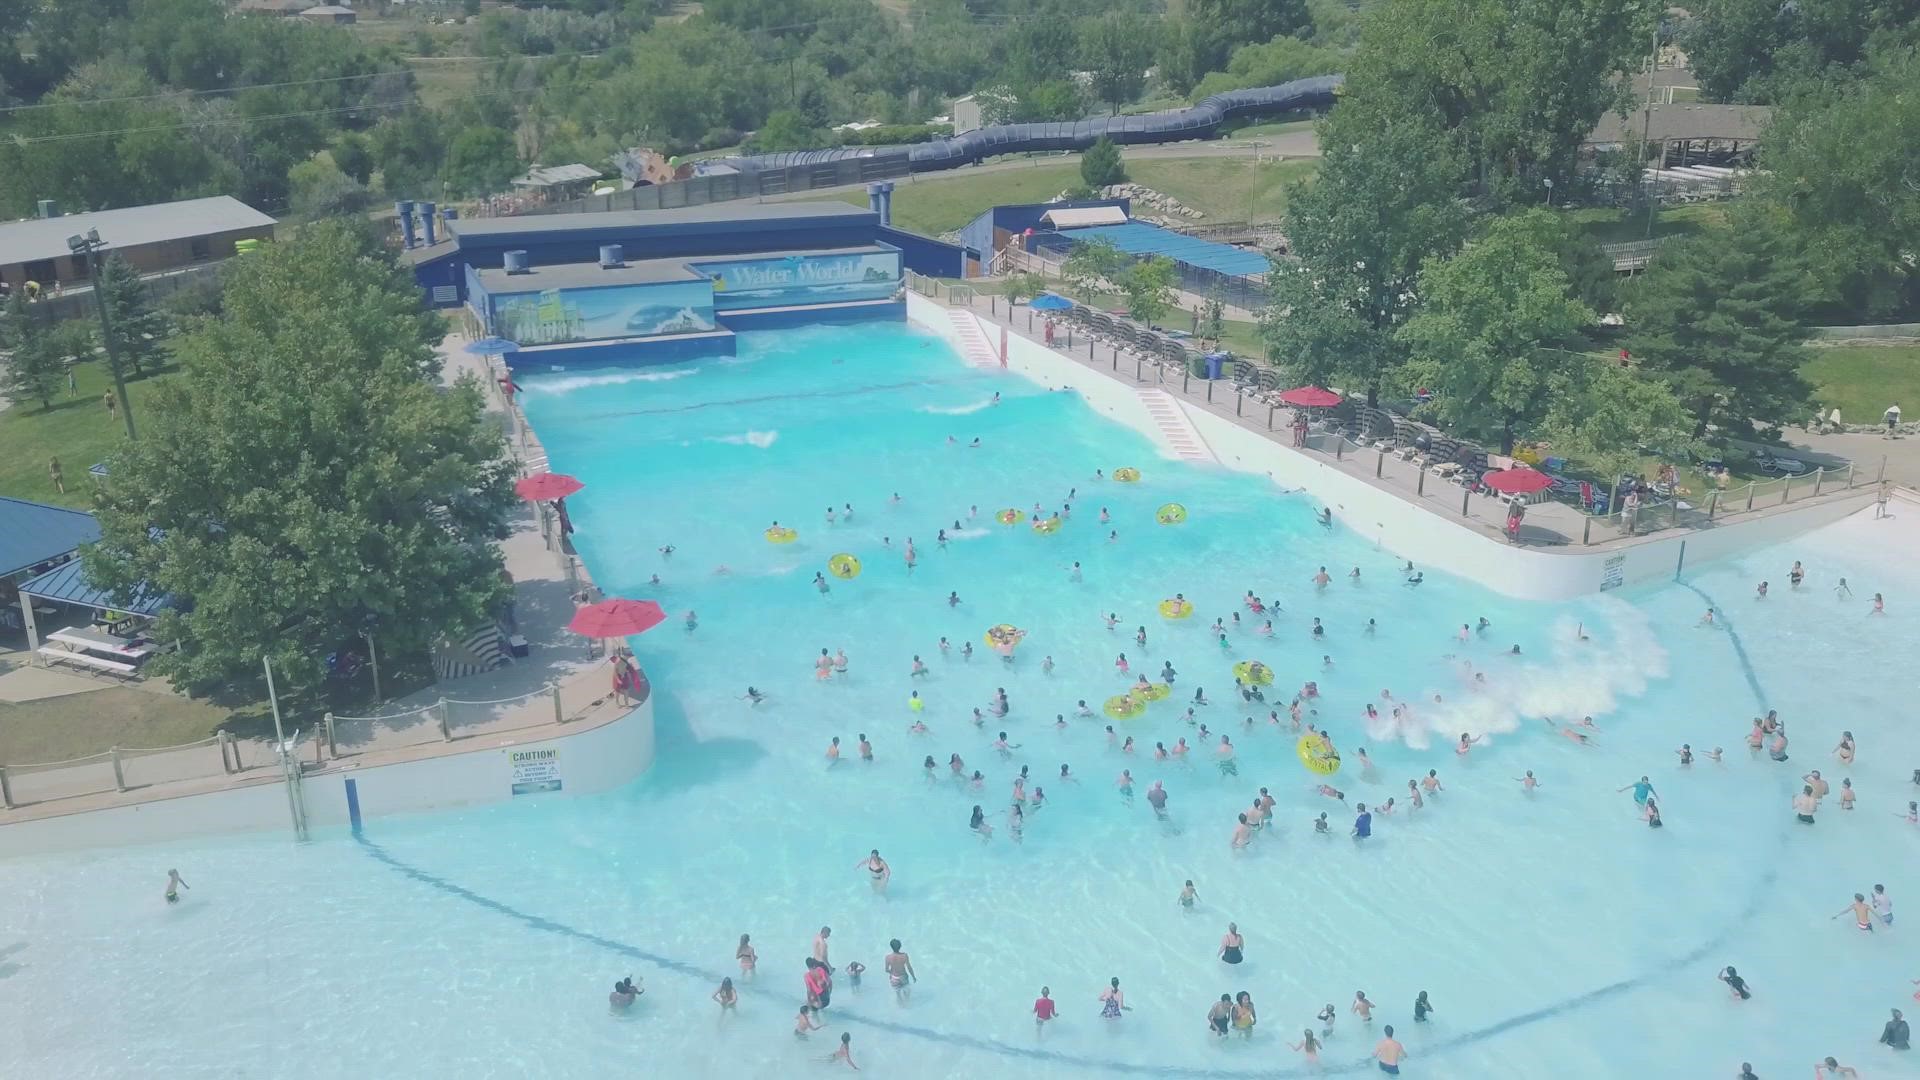 Water World, one of America's largest waterparks, is located in the Denver metro area, in Federal Heights, Colo.